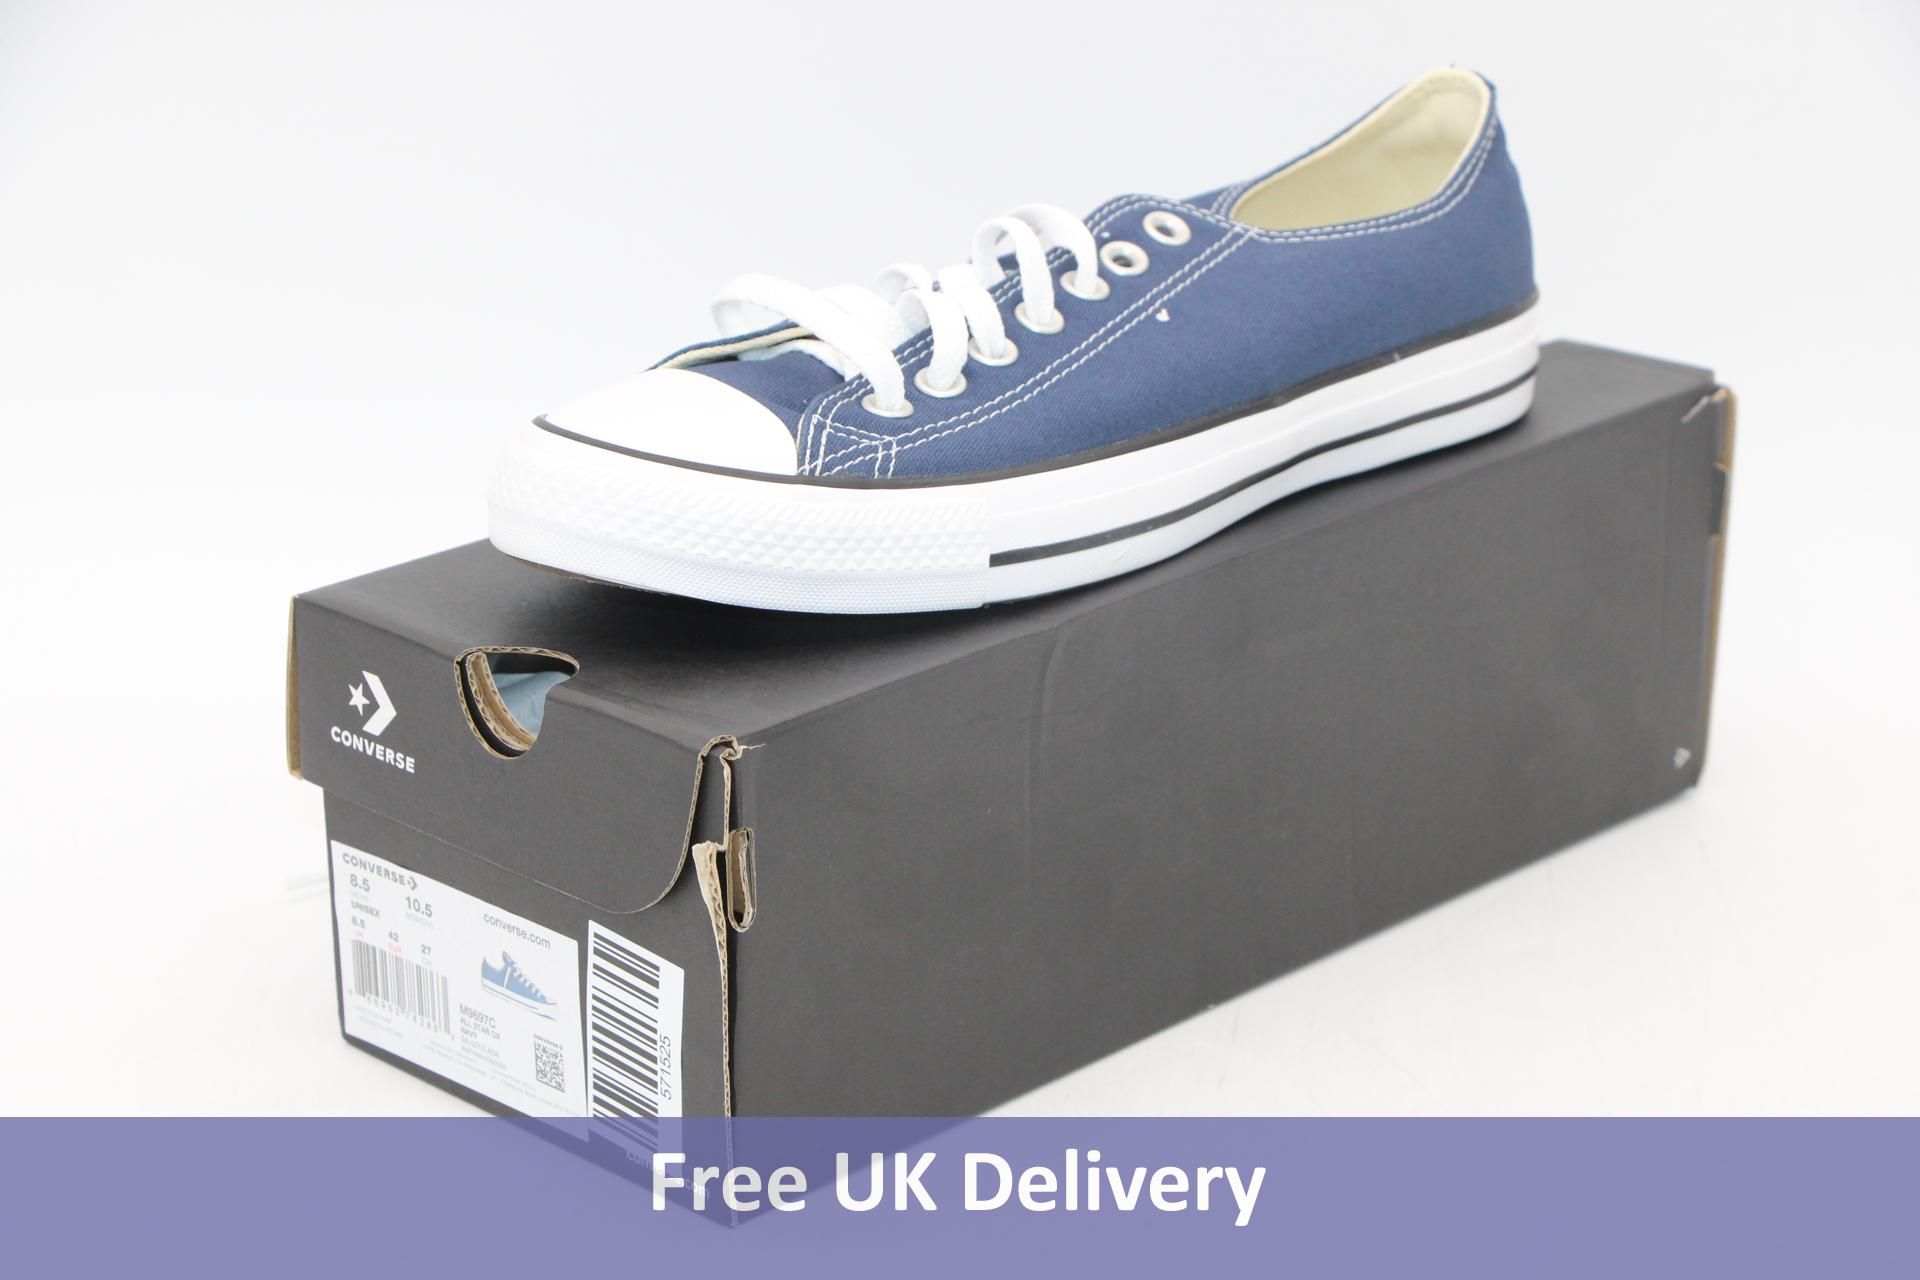 Converse All Star Ox Shoes, Navy/White, UK 8.5